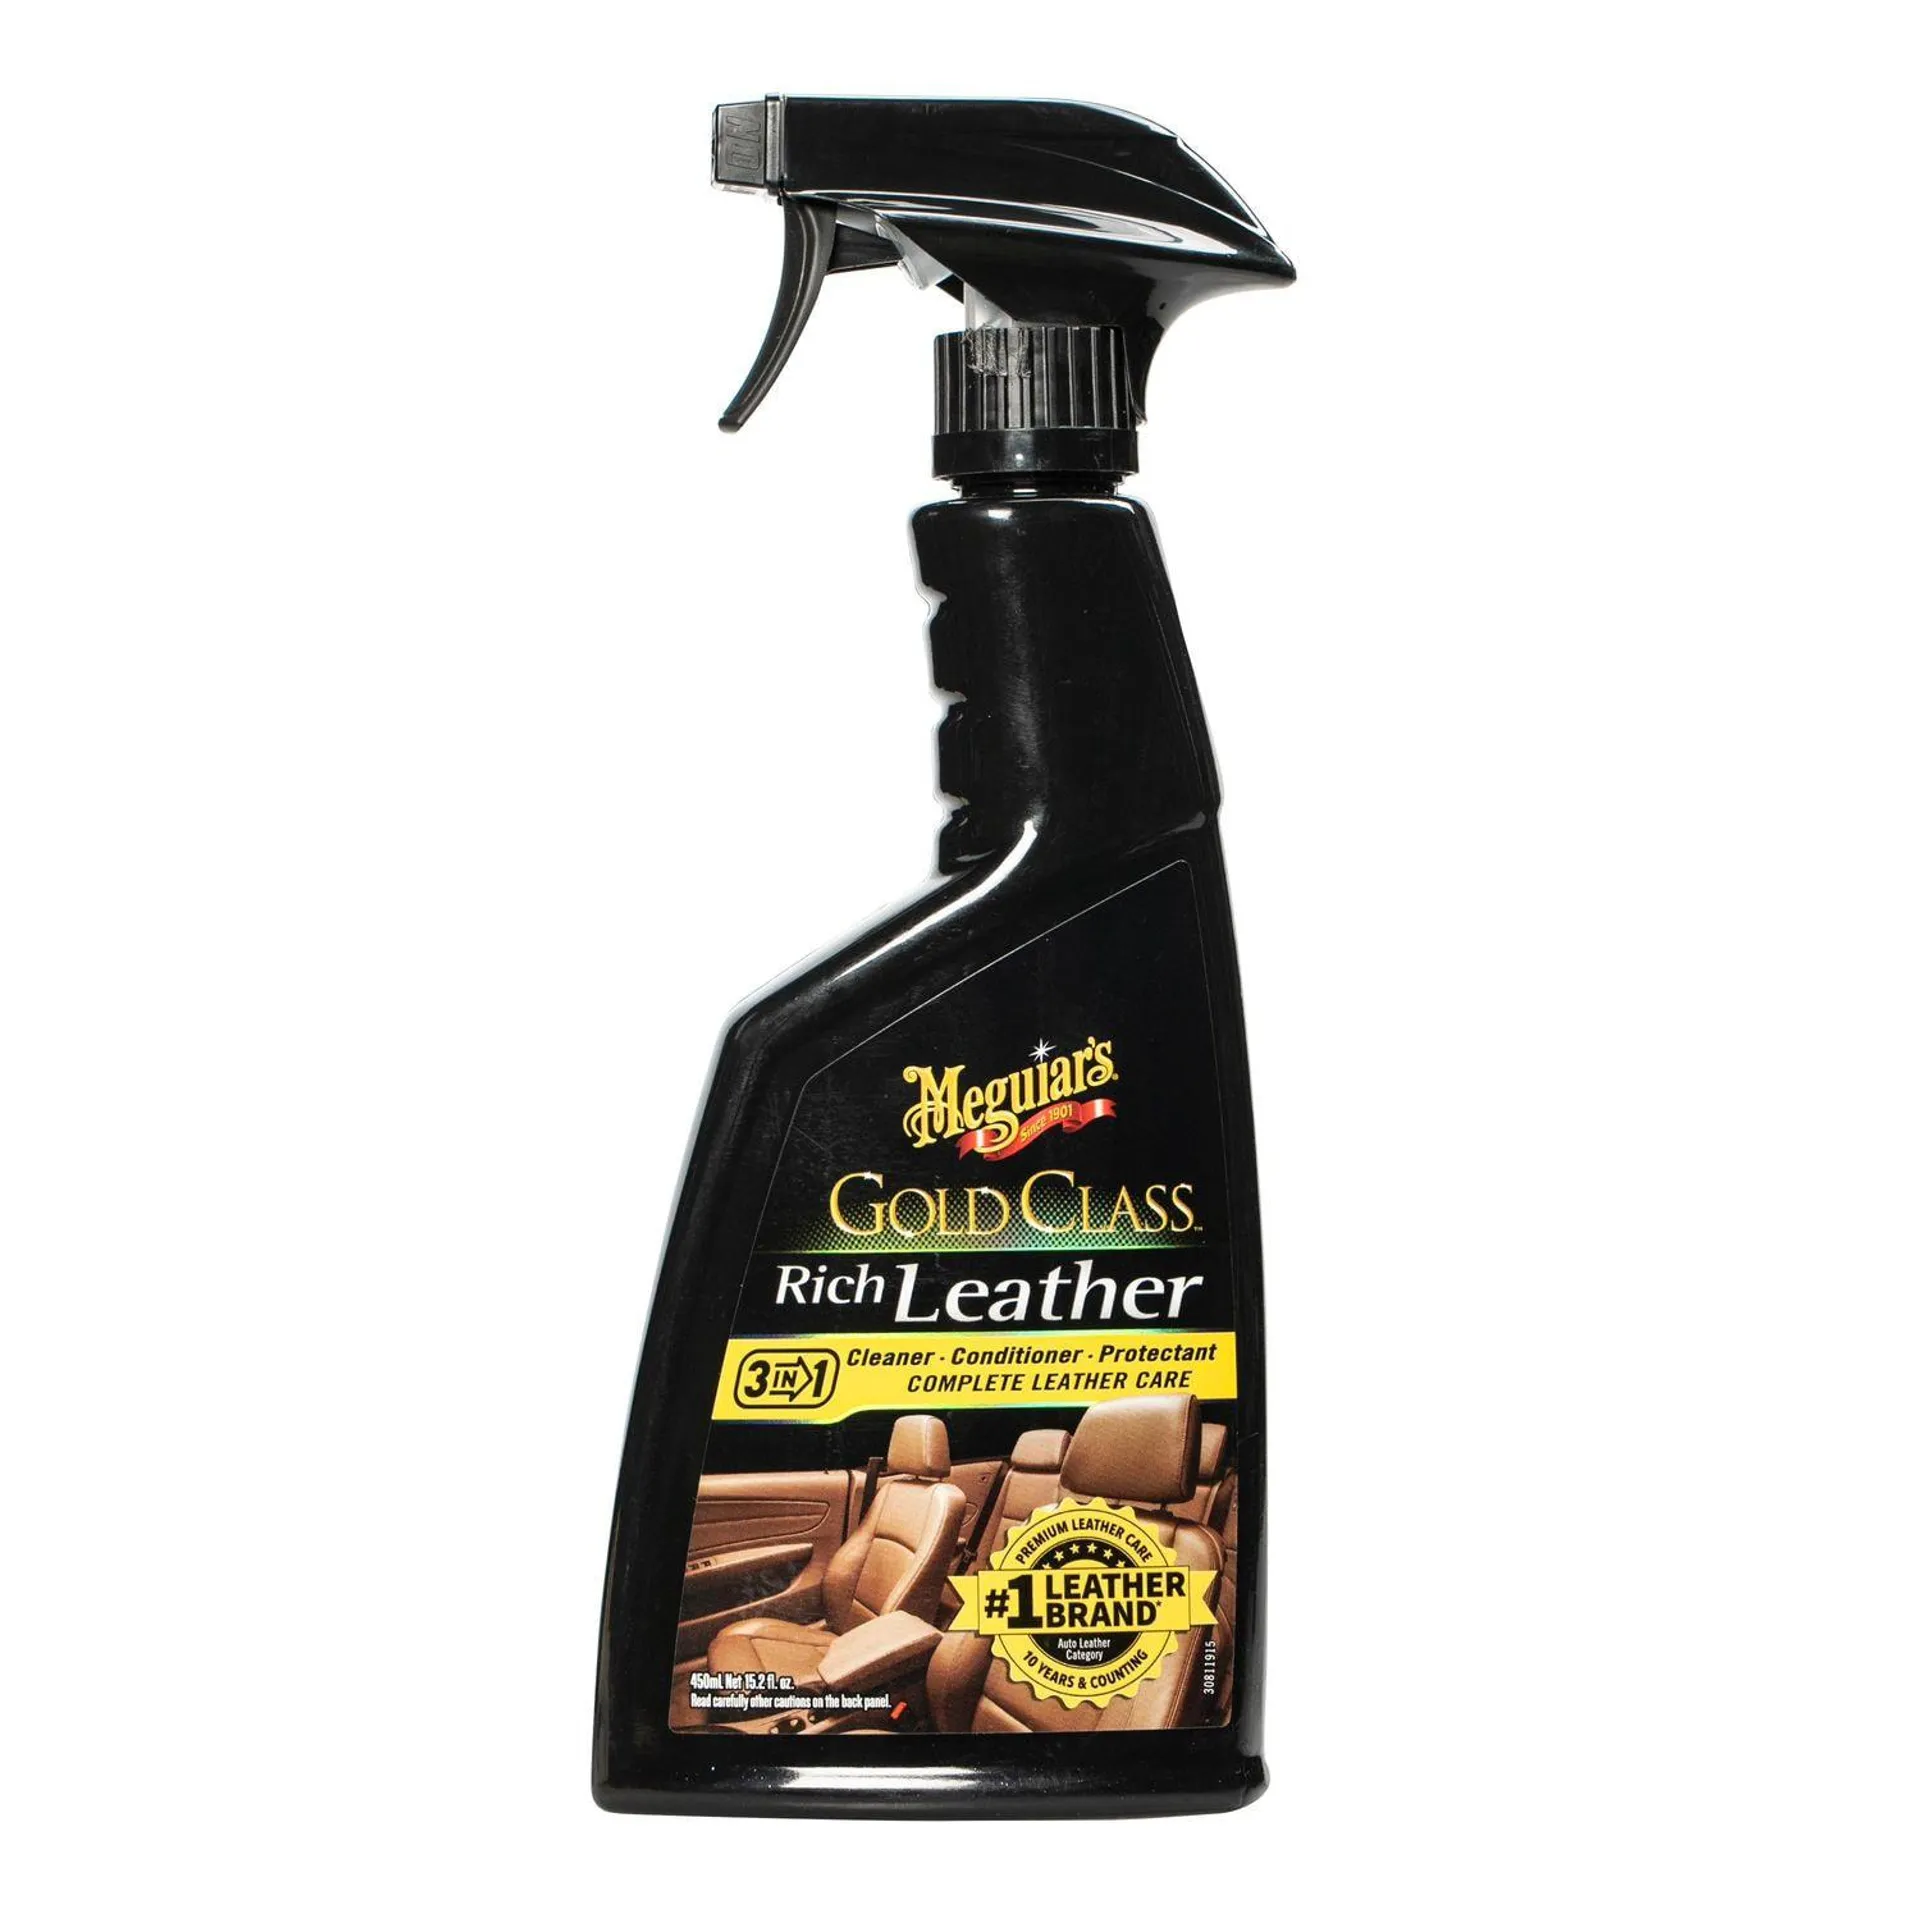 Meguiar's Gold Class Rich Leather Cleaner and Conditioner Spray 16oz